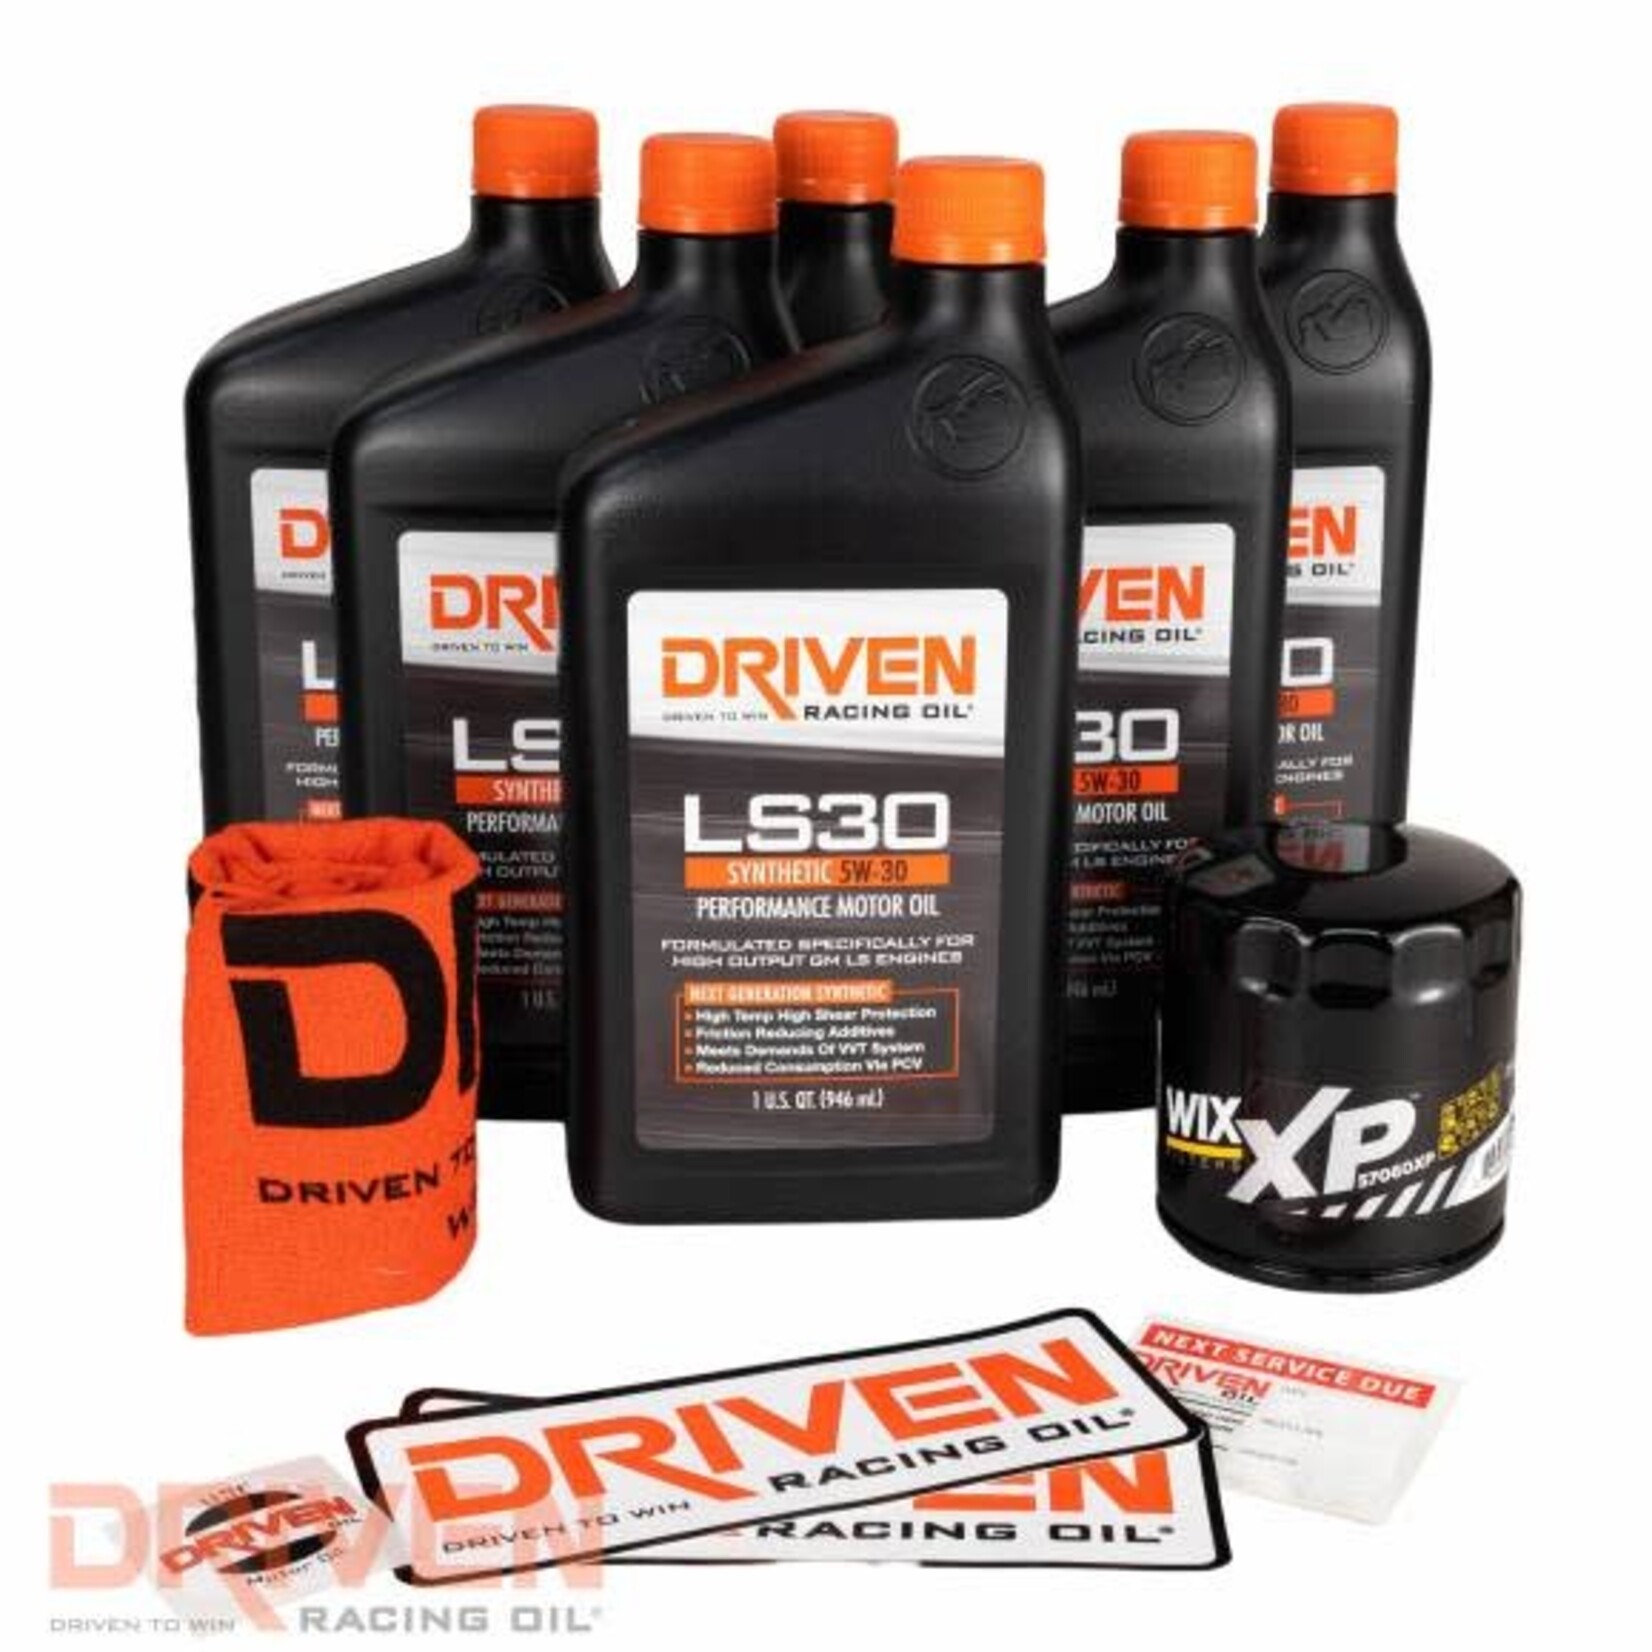 DRIVEN DRIVEN RACING OIL LS30 Oil Change Kit for Gen IV GM Engines (2007-Present) w/ 6 Qt Oil Capacity